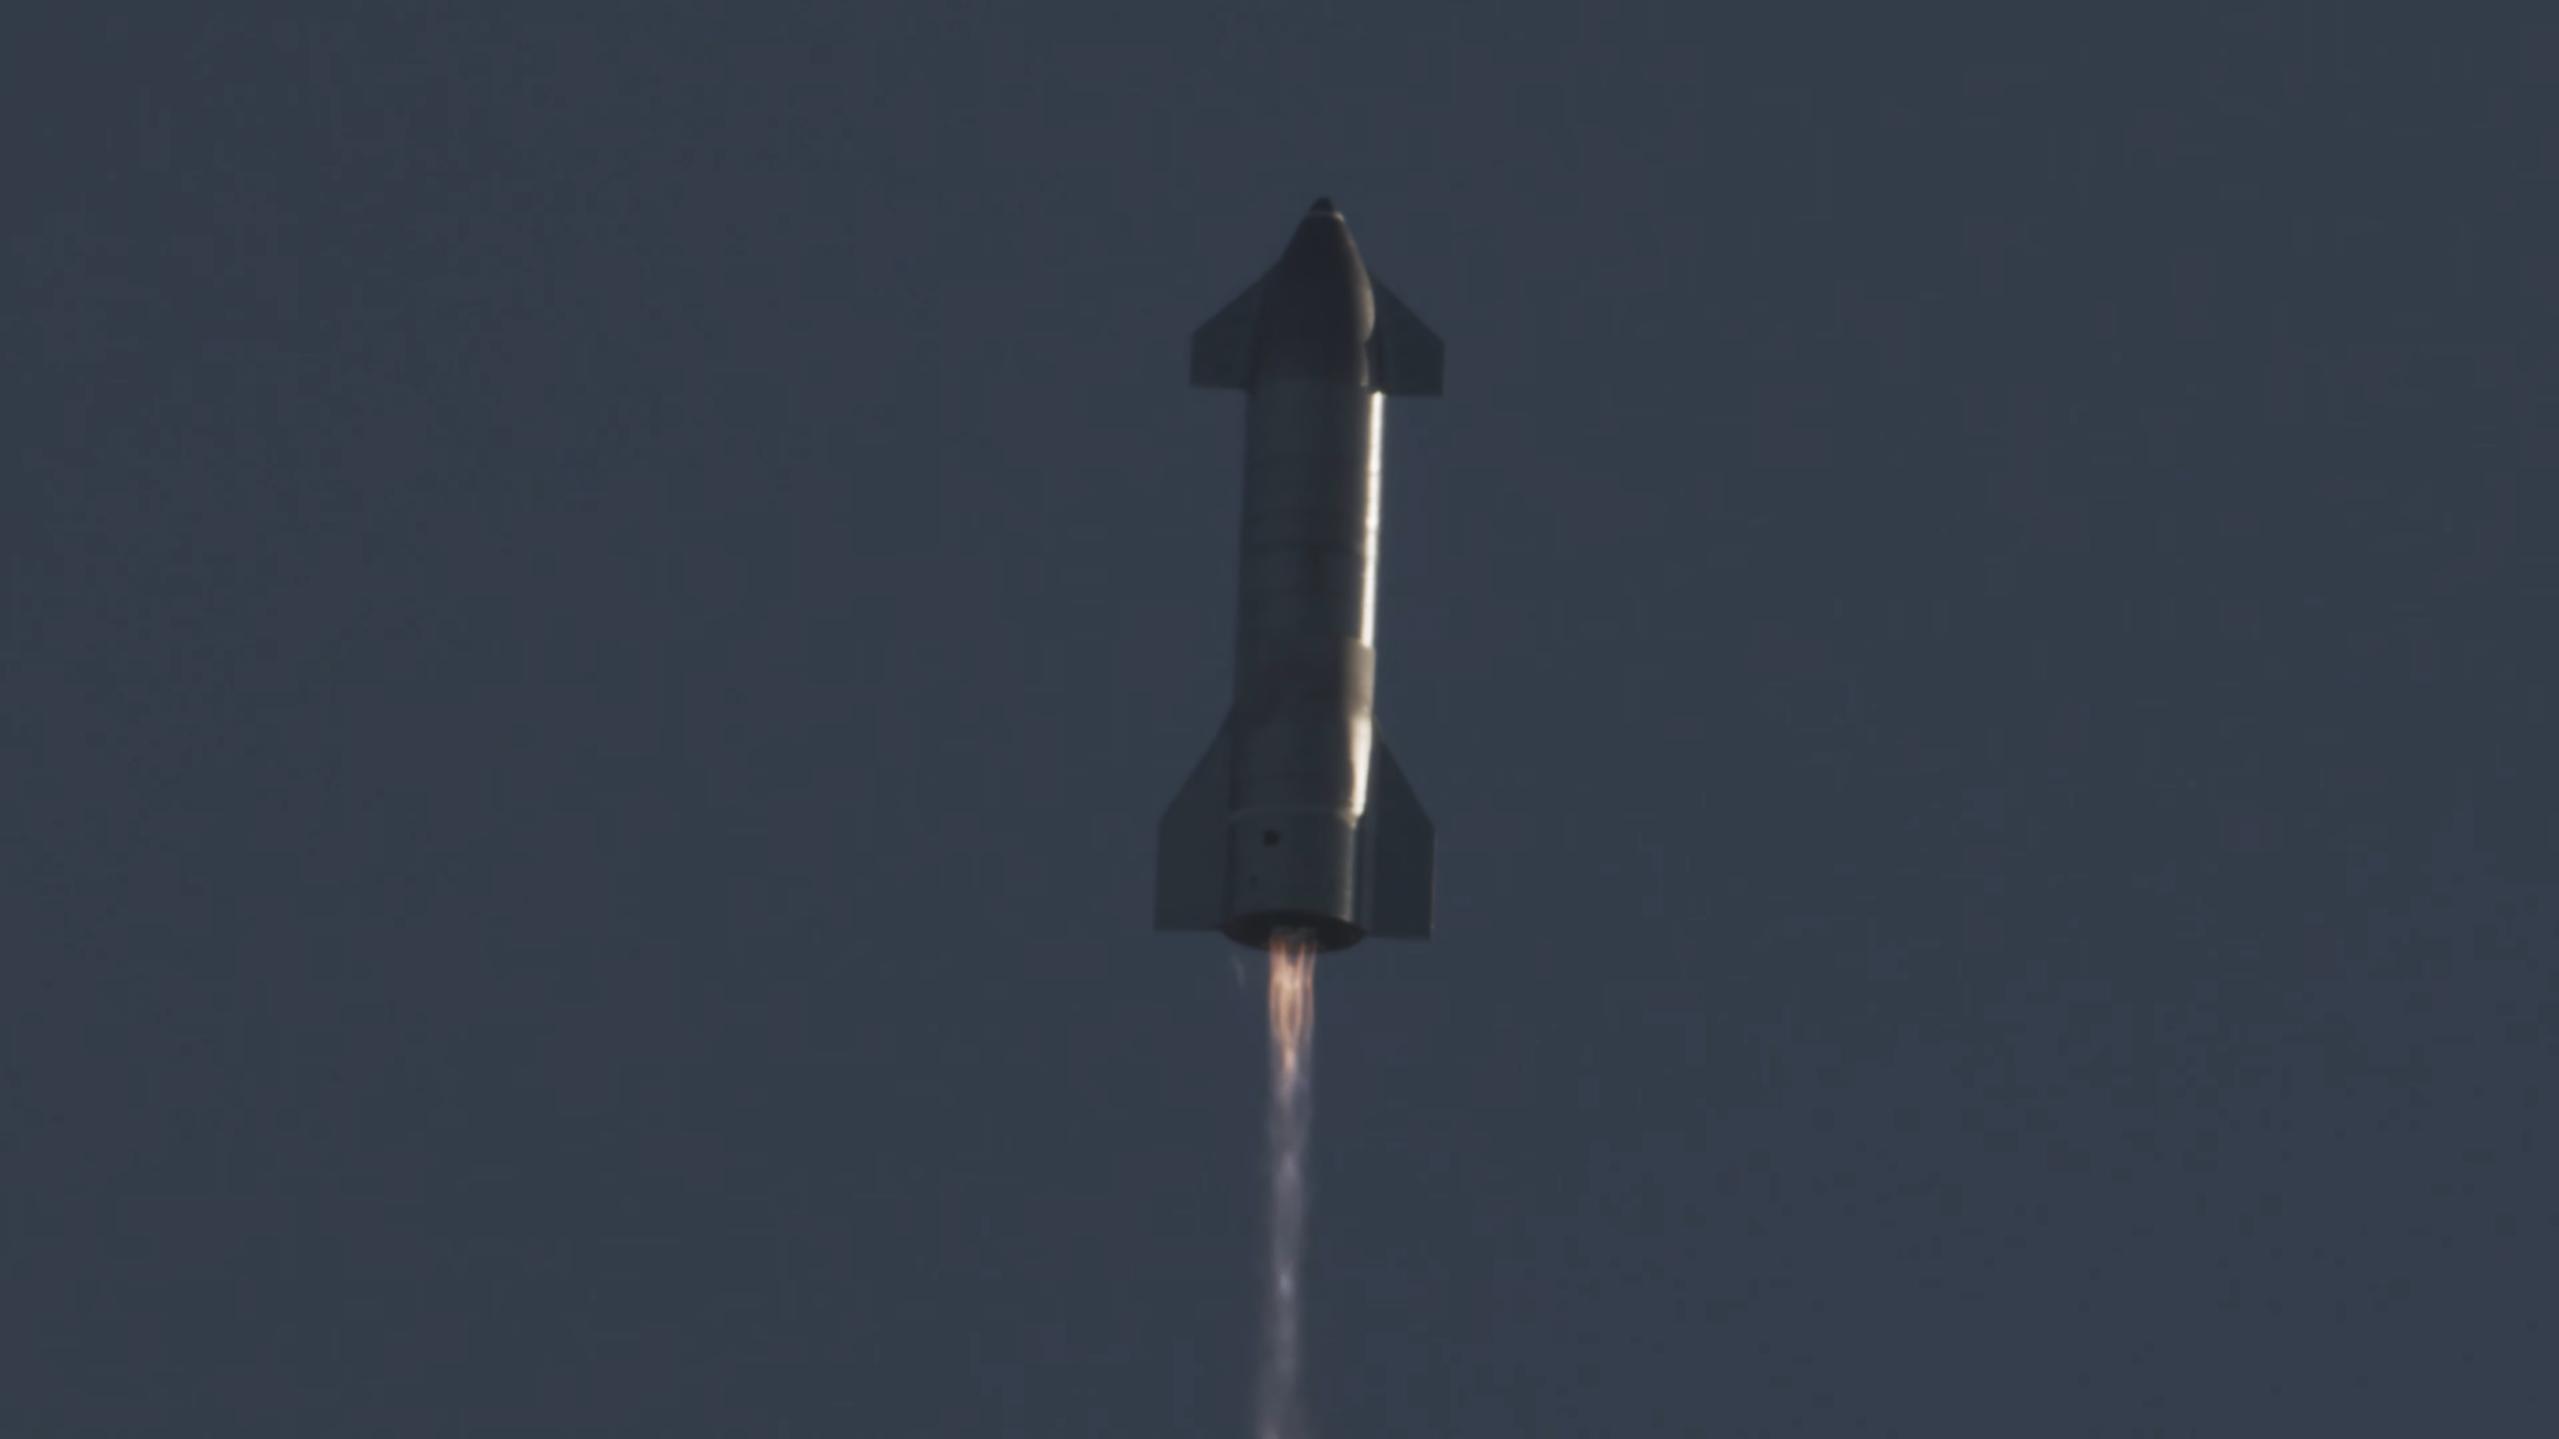 Starship SN8 launch recap 120920 (SpaceX) ascent 1 (c)